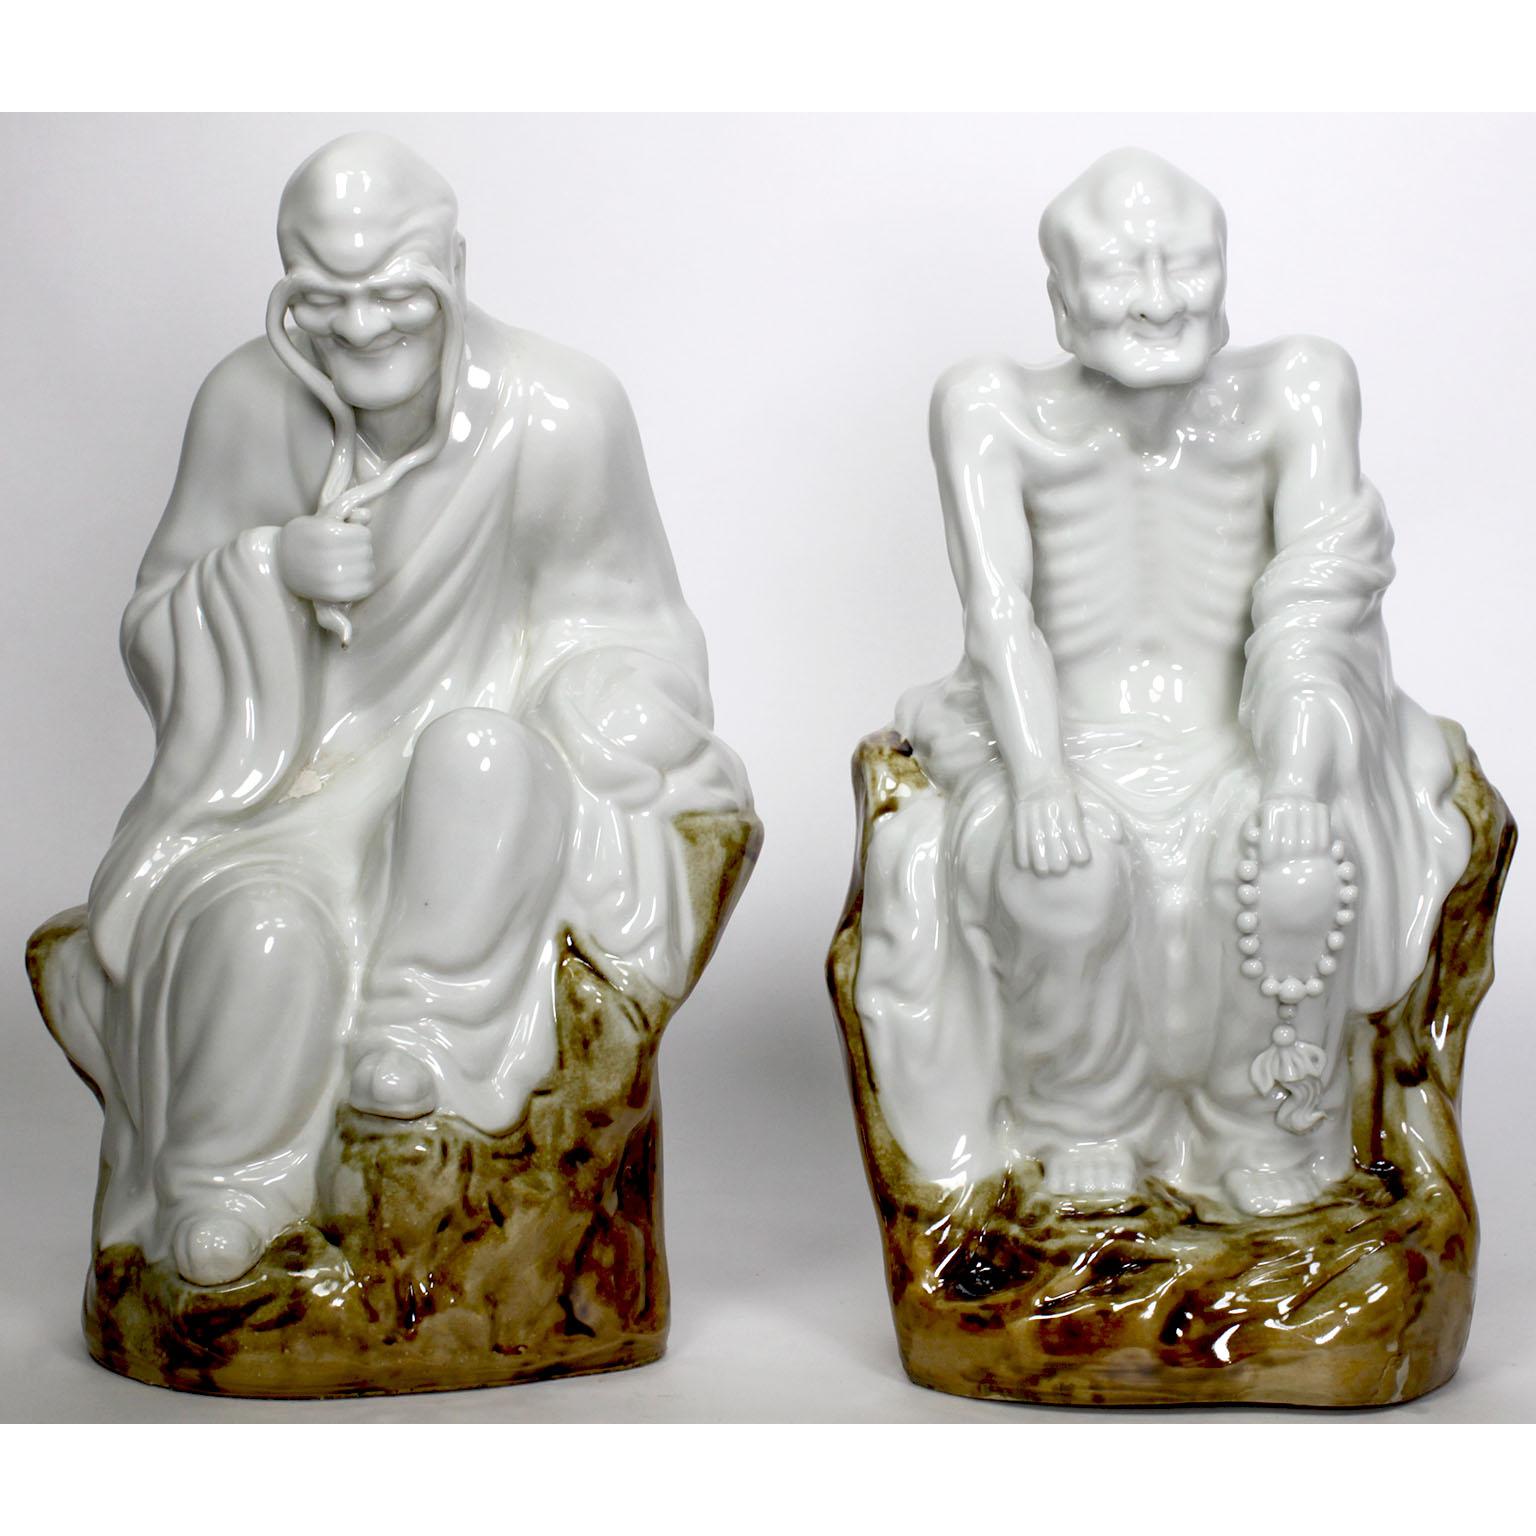 Chinese Set of Eighteen Blanc de Chine Enameled Ceramic Arhats or Luohan Buddhas For Sale 3